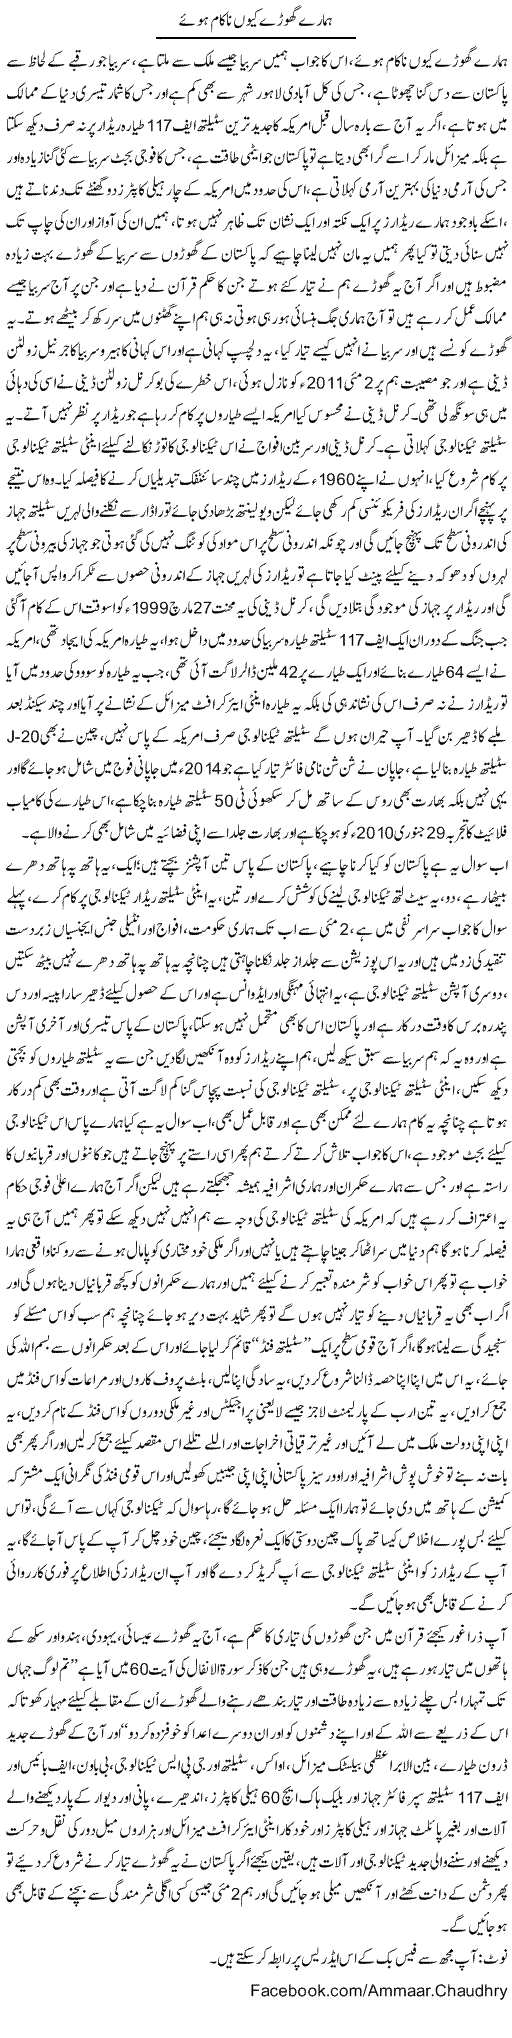 Why We Failed Express Column Amad Chaudhry 15 May 2011